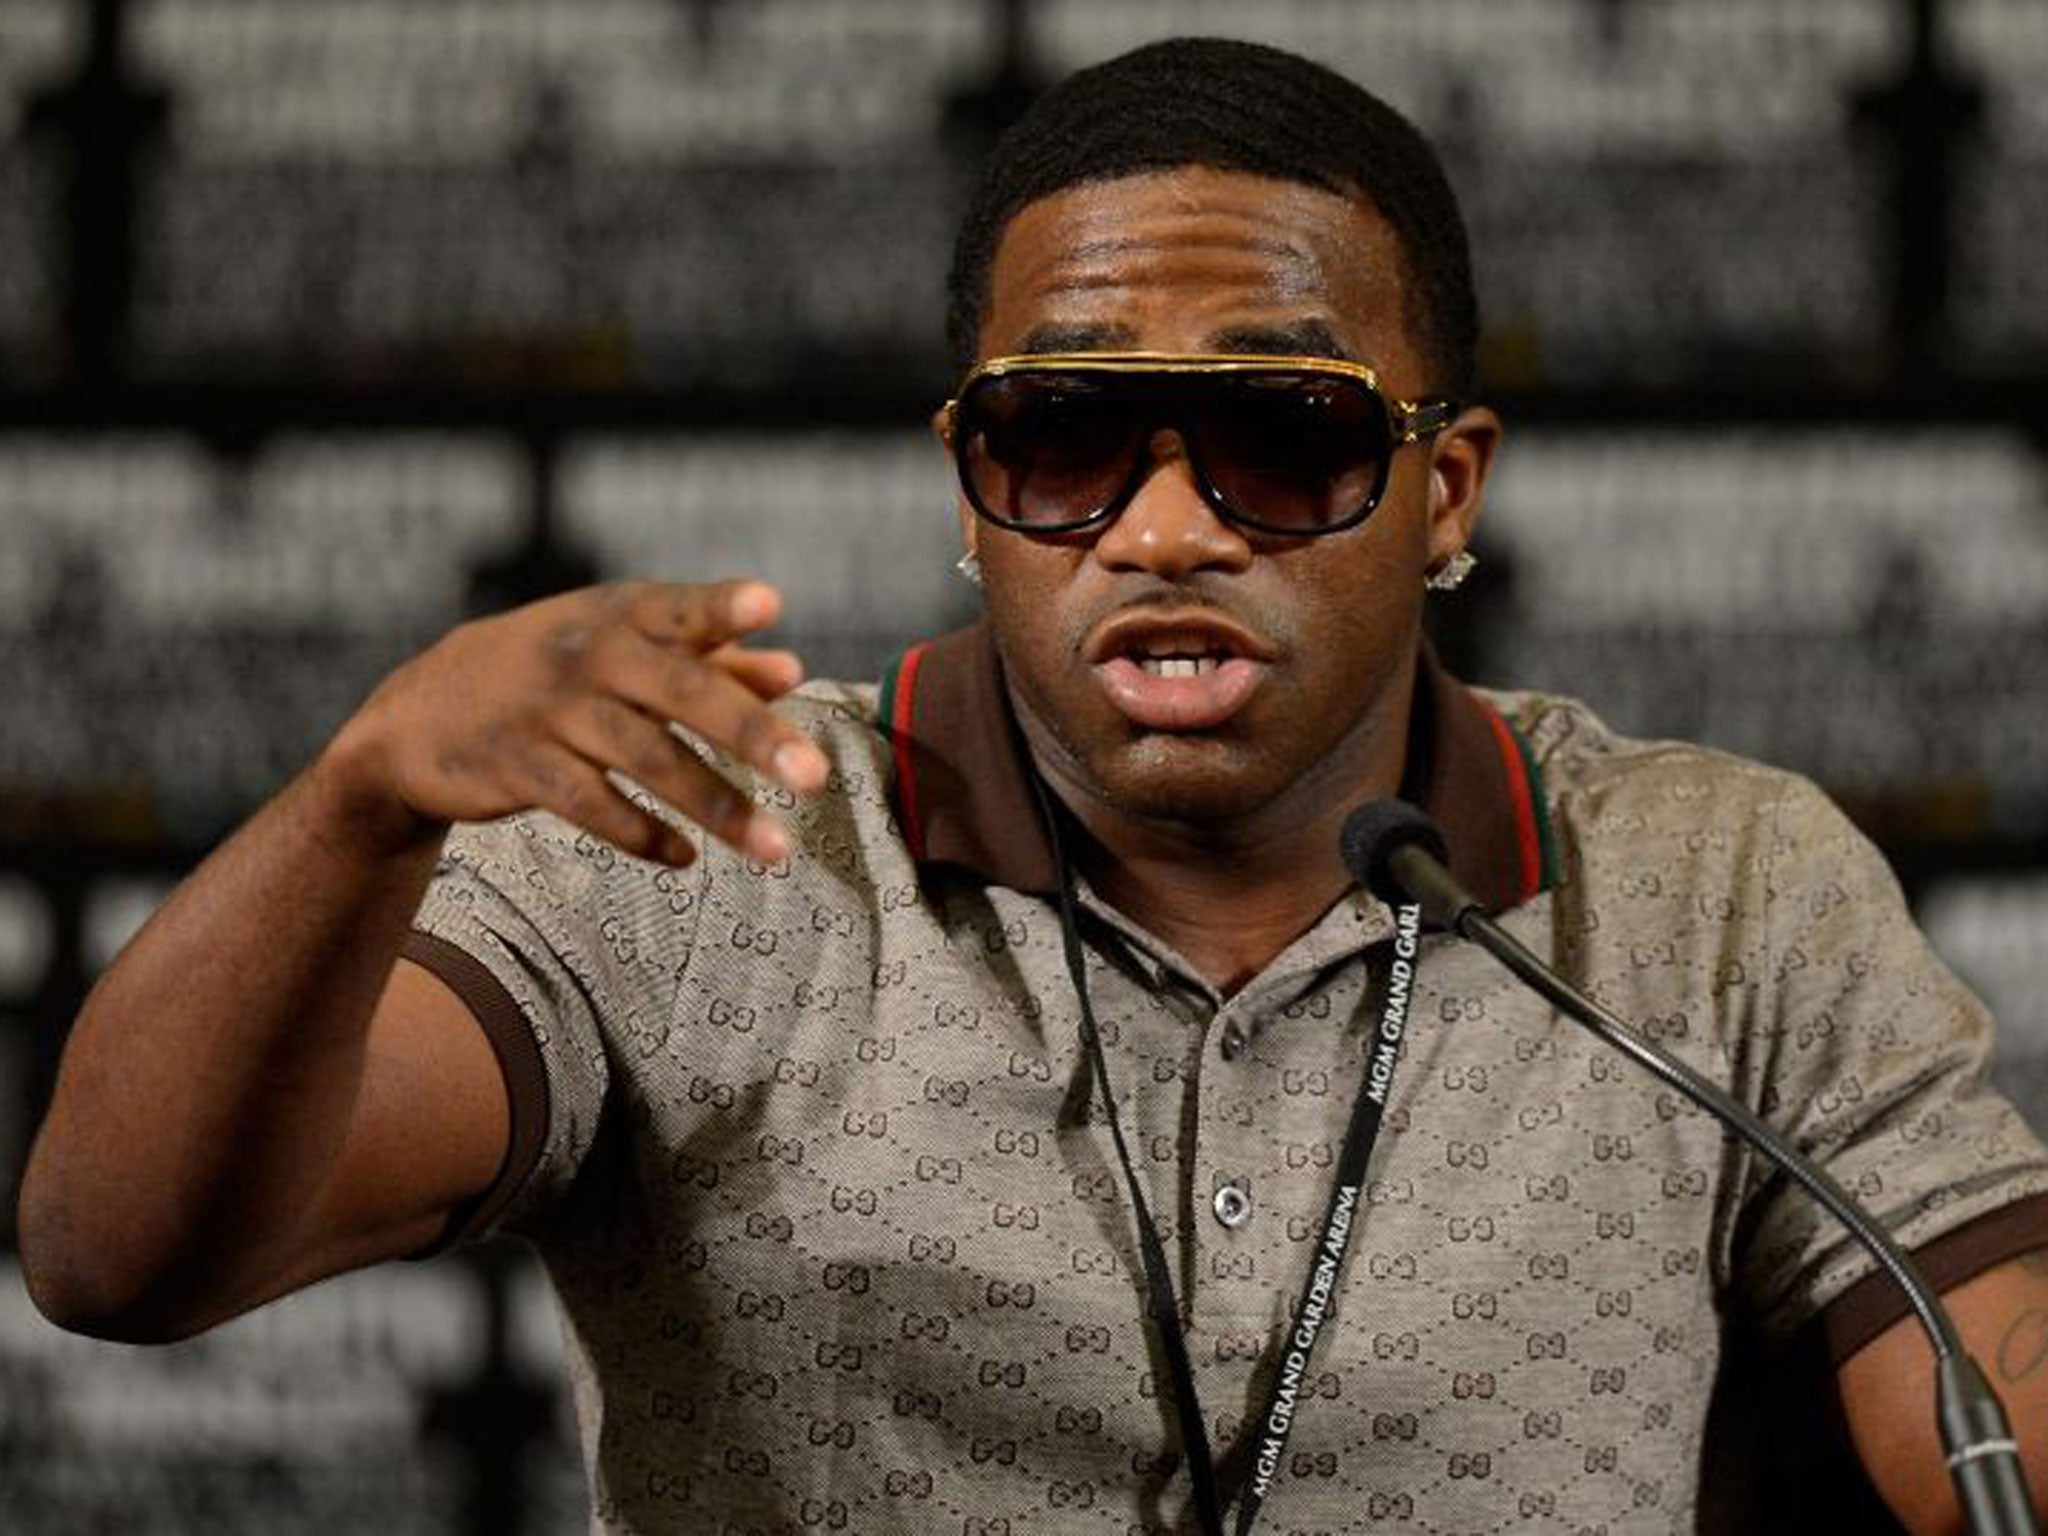 American fighter Adrien Broner has won all 25 of his fights